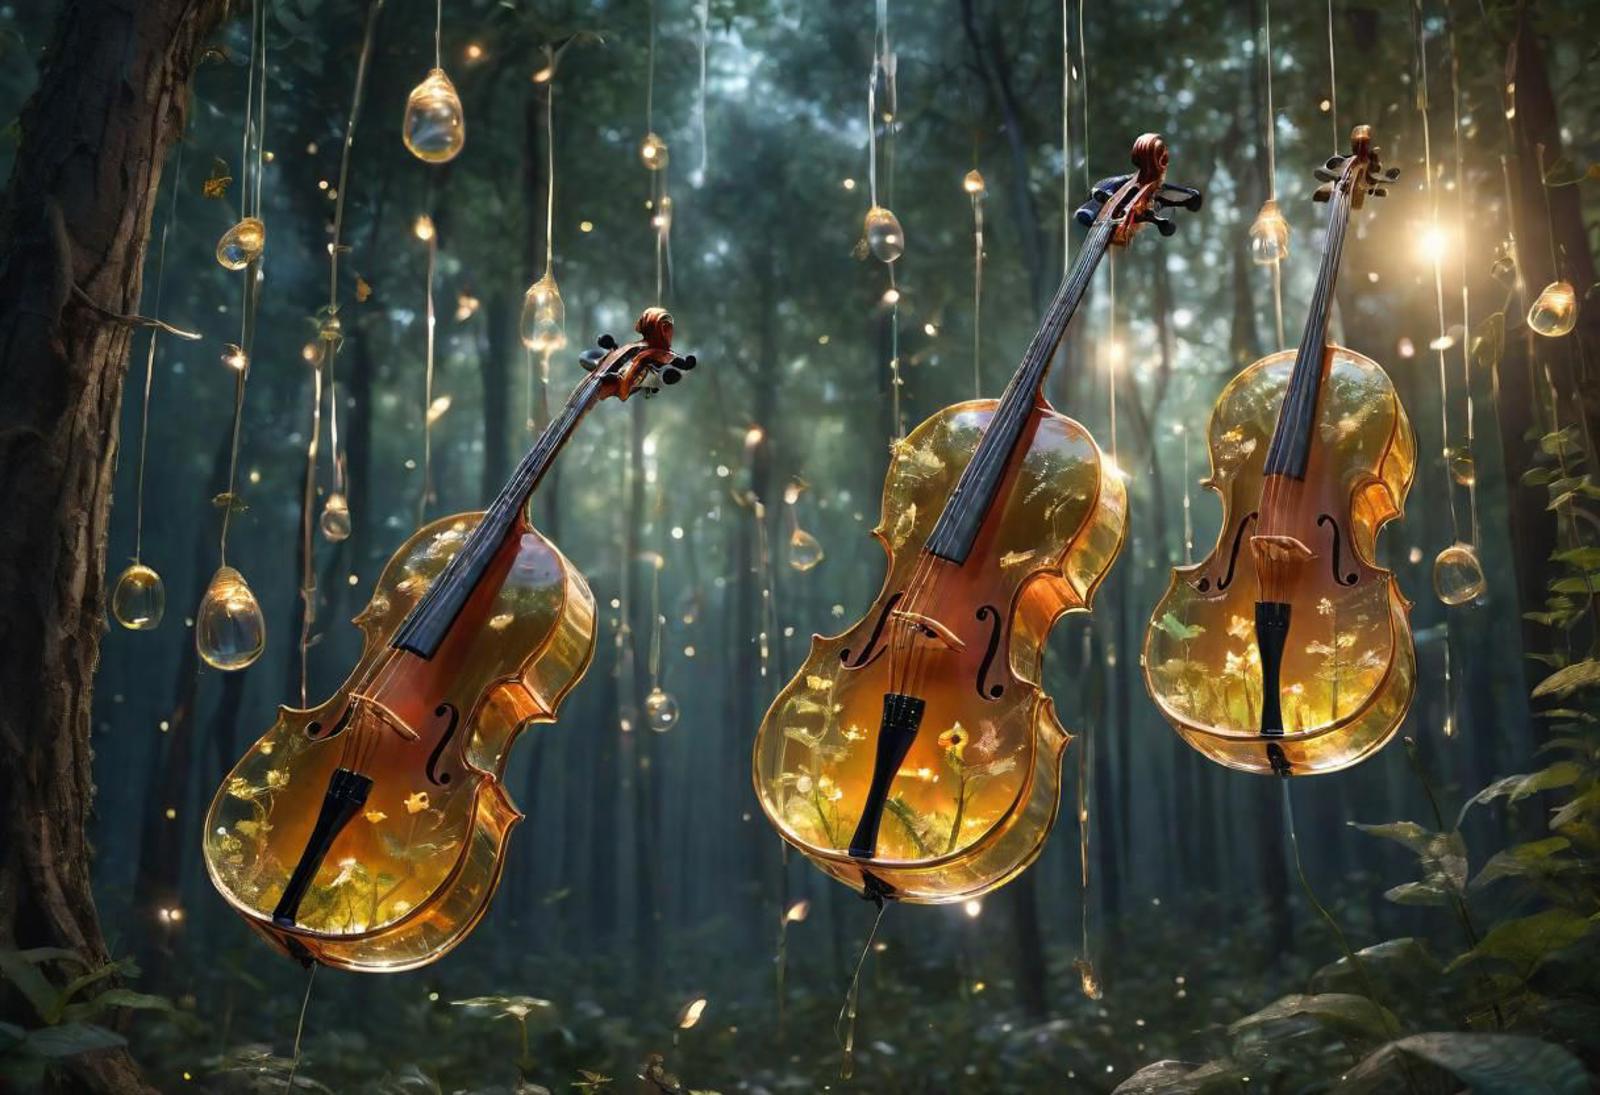 Three Violins Hanging in the Air in a Forest: A Fantasy Art Scene